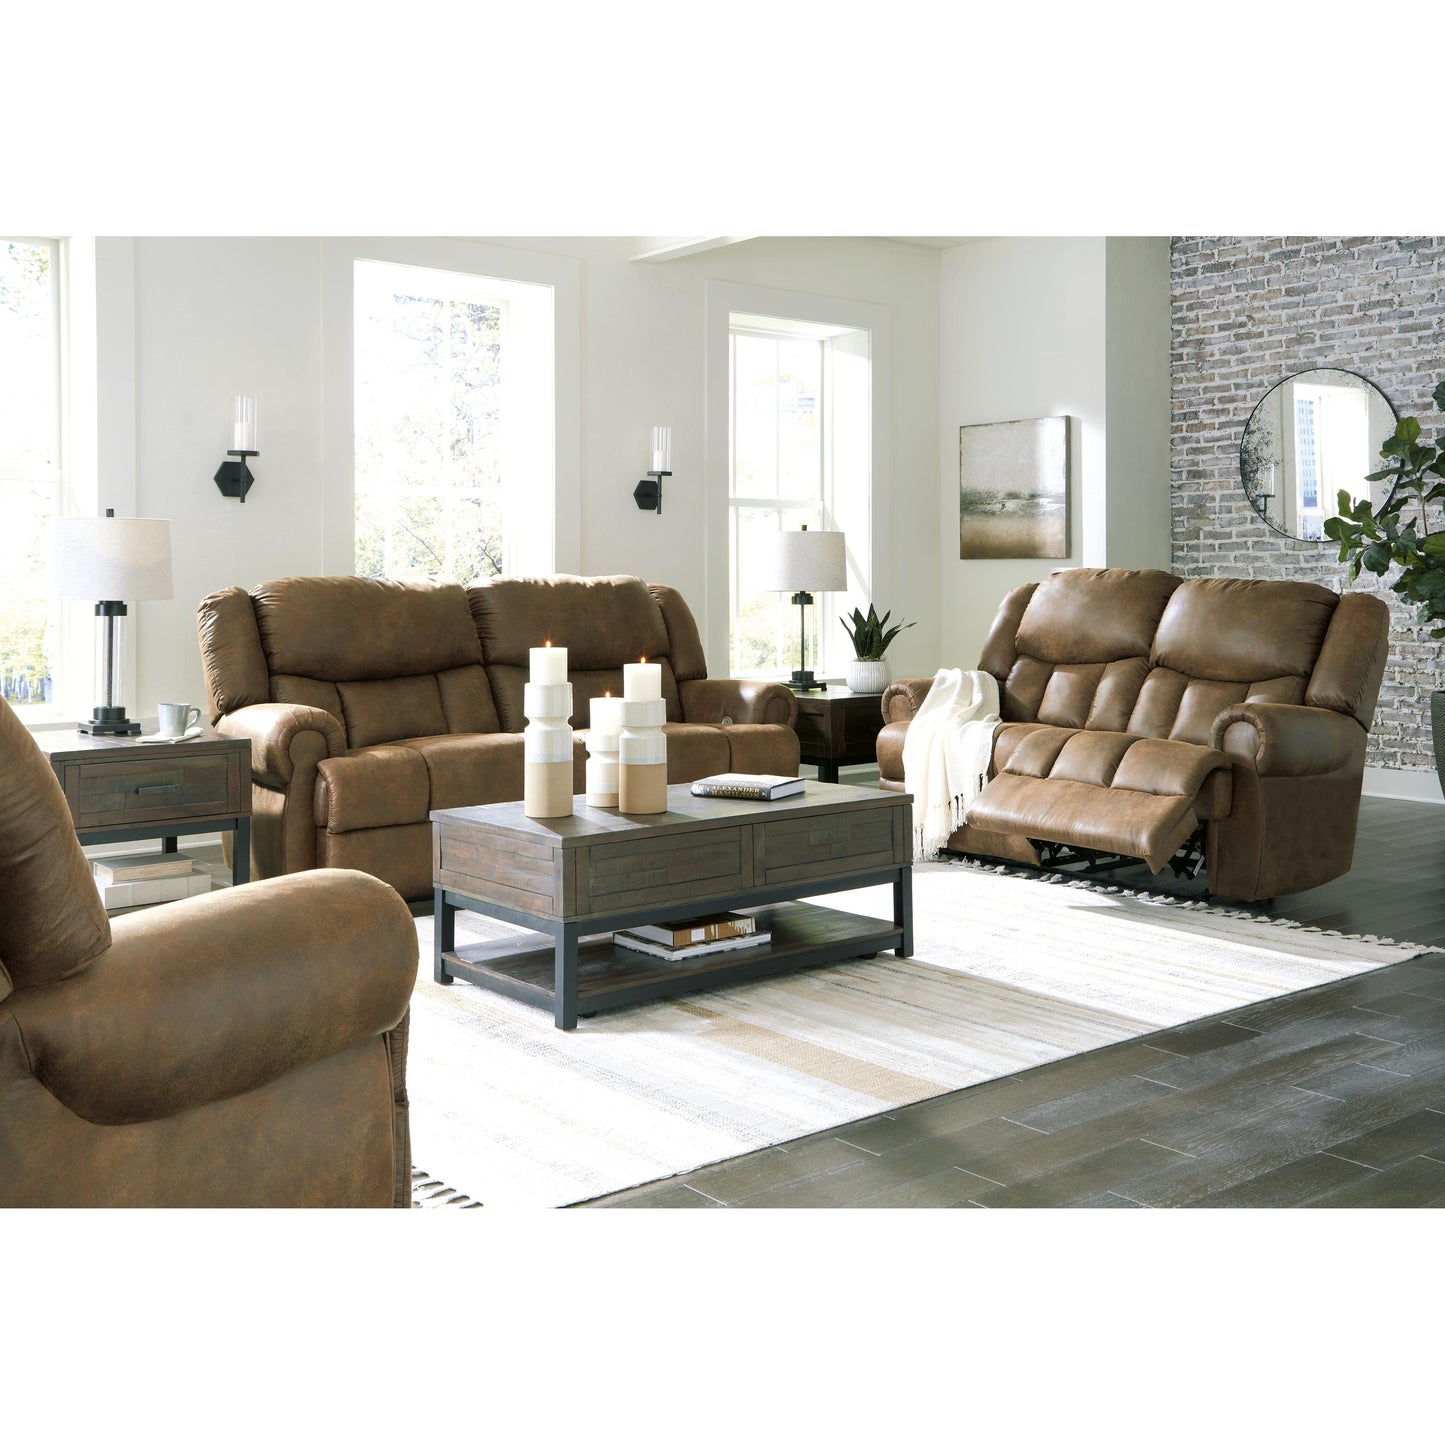 Signature Design by Ashley Boothbay Power Reclining Leather Look Loveseat 4470474 IMAGE 9